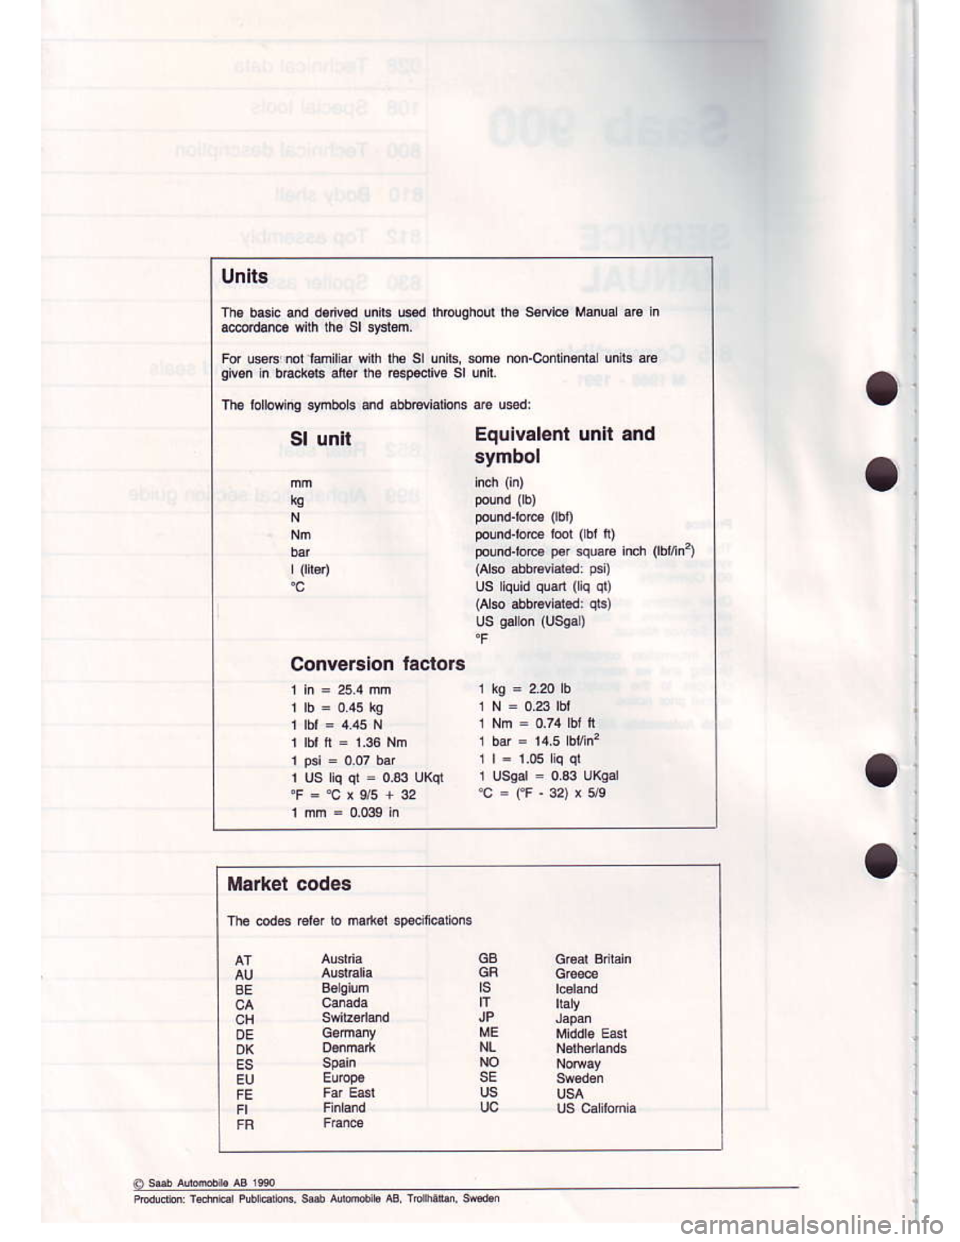 SAAB 900 1986  Service Manual Downloaded from www.Manualslib.com manuals search engine UnKt3
lshoul lh. s.vl6 Mmur m h
.@d.r ri6 tho Sl sydo.n.
Fdl)slra.1oni|br}im.€|unibqrvs rn bEdd and m. @p*[E sr unn.
Th€ l.ro$iq synboE